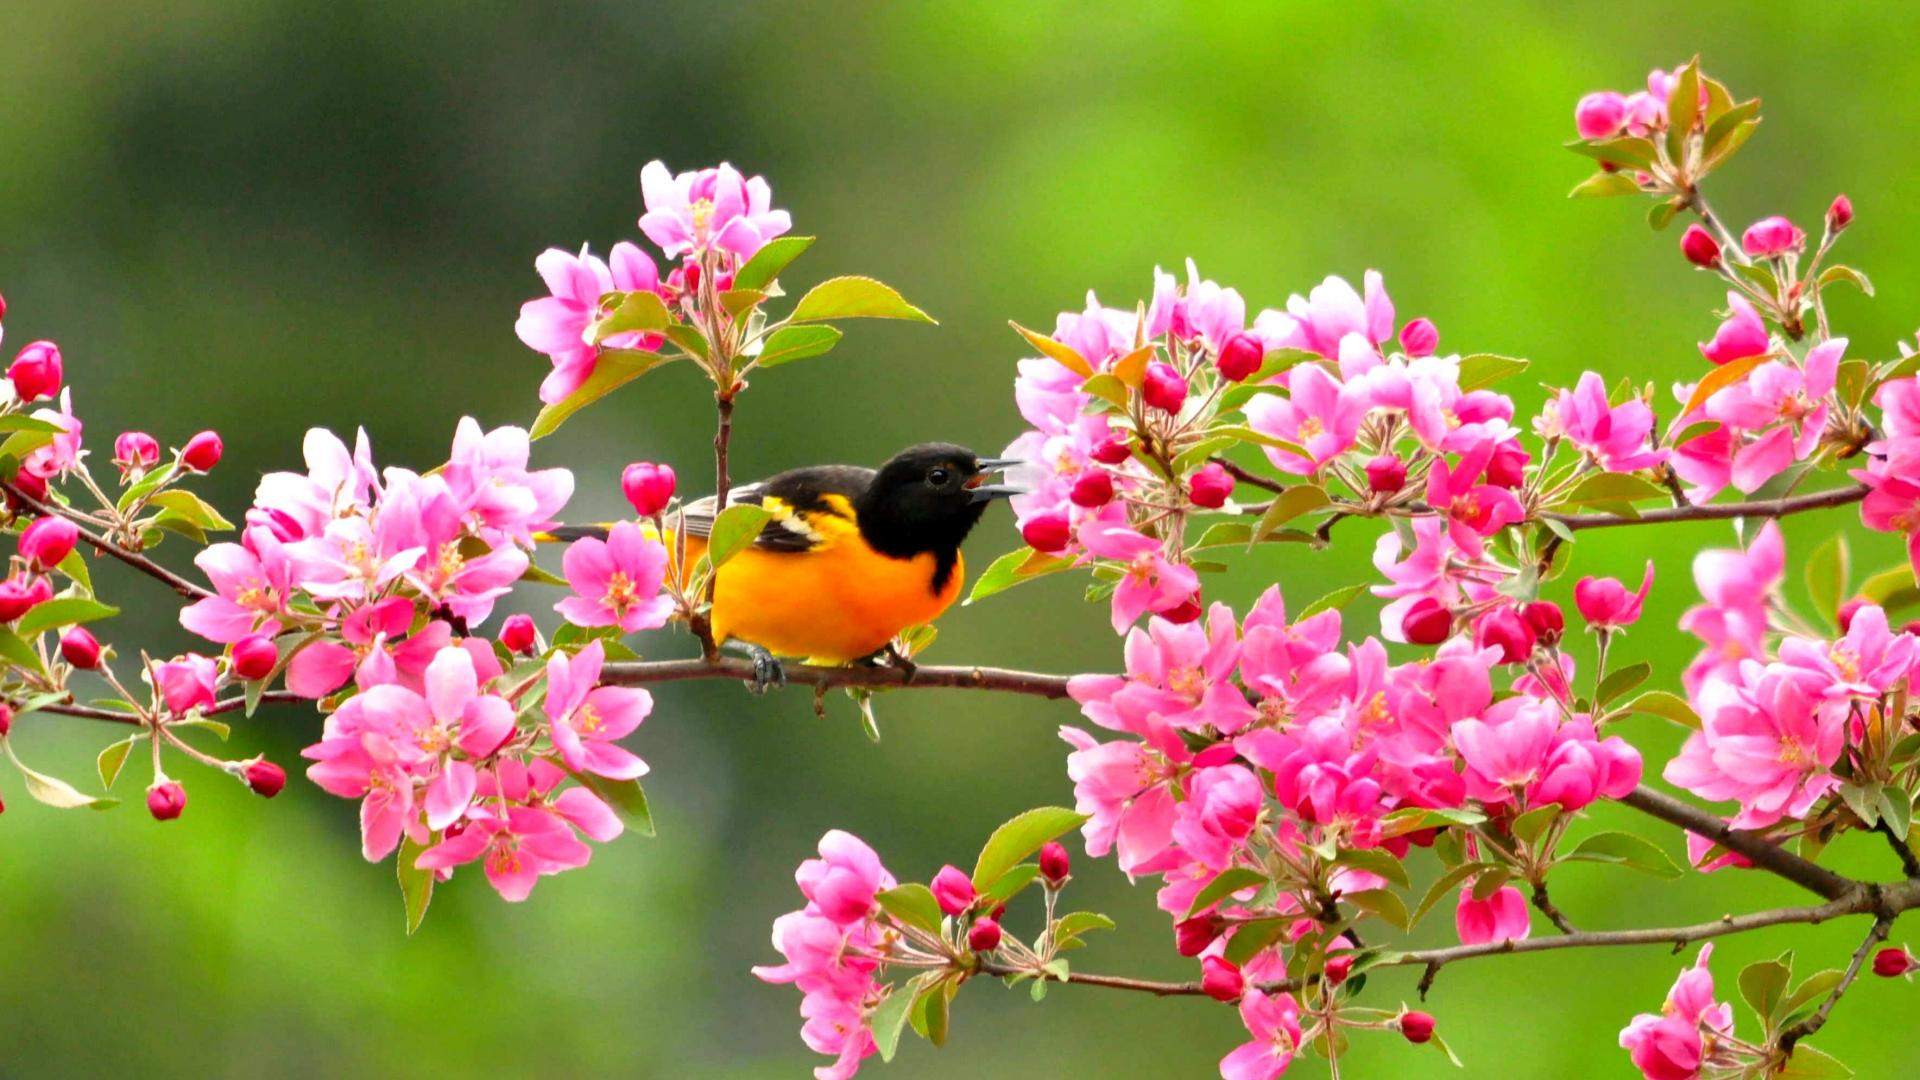 Baltimore Orioles High Quality And Resolution Wallpaper